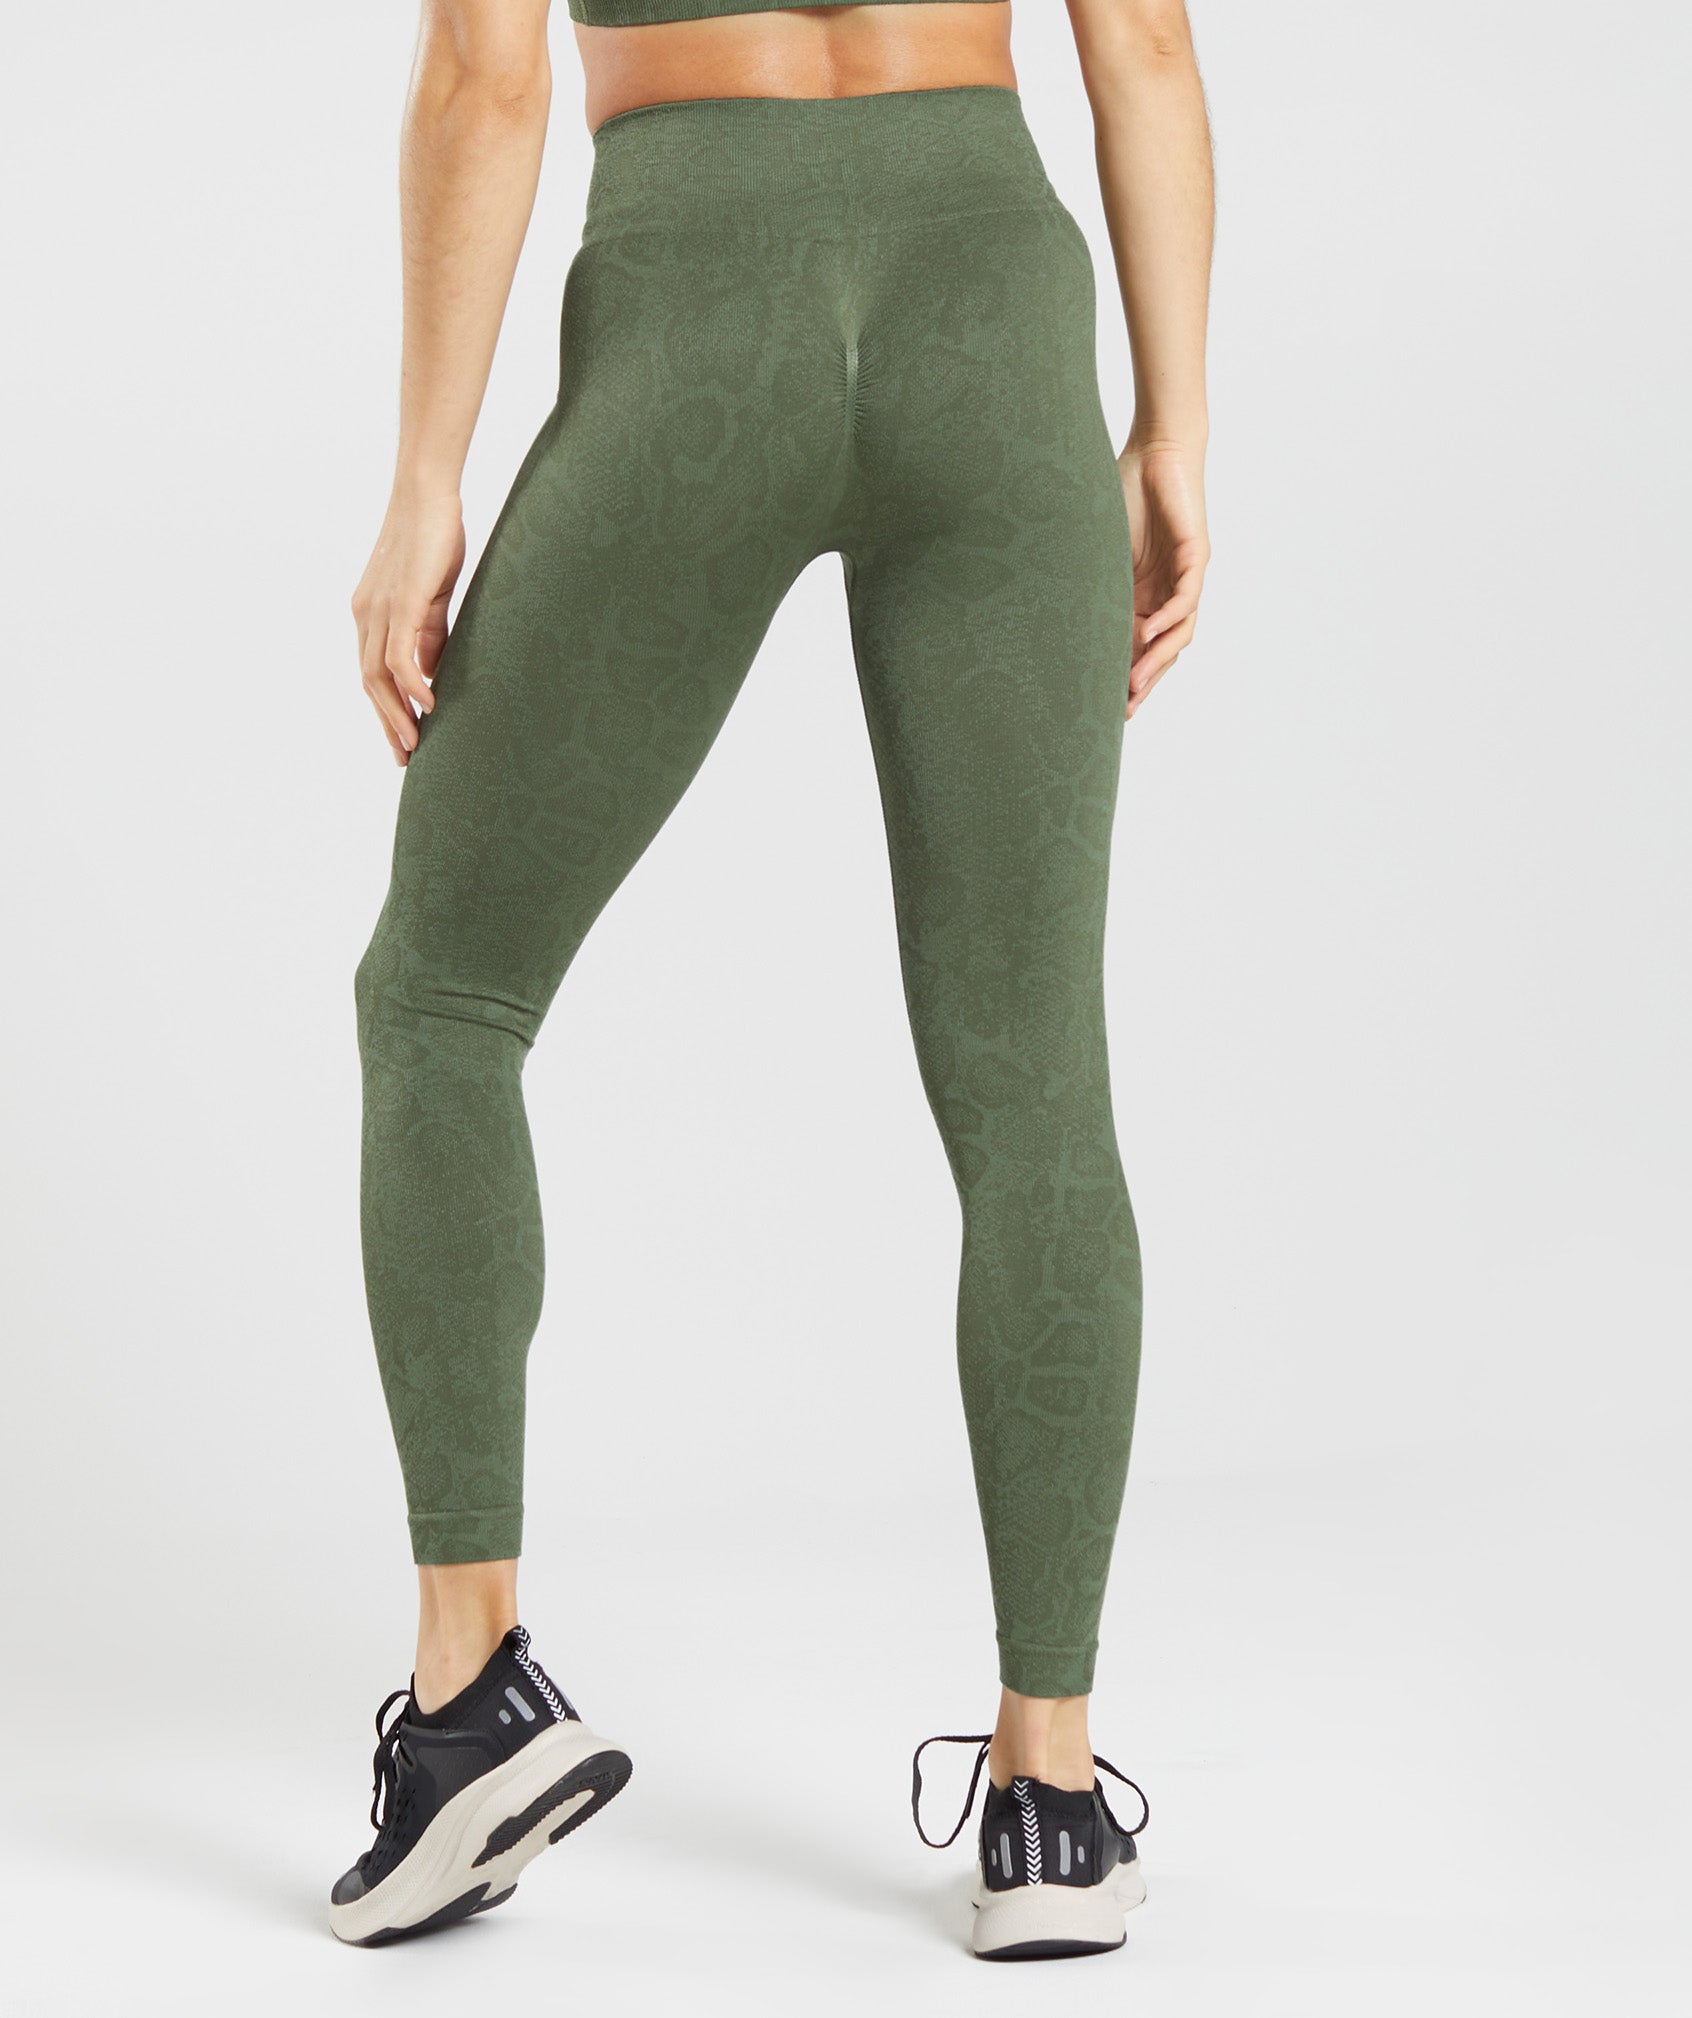 Adapt Animal Seamless Leggings in Willow Green/Core Olive - view 2